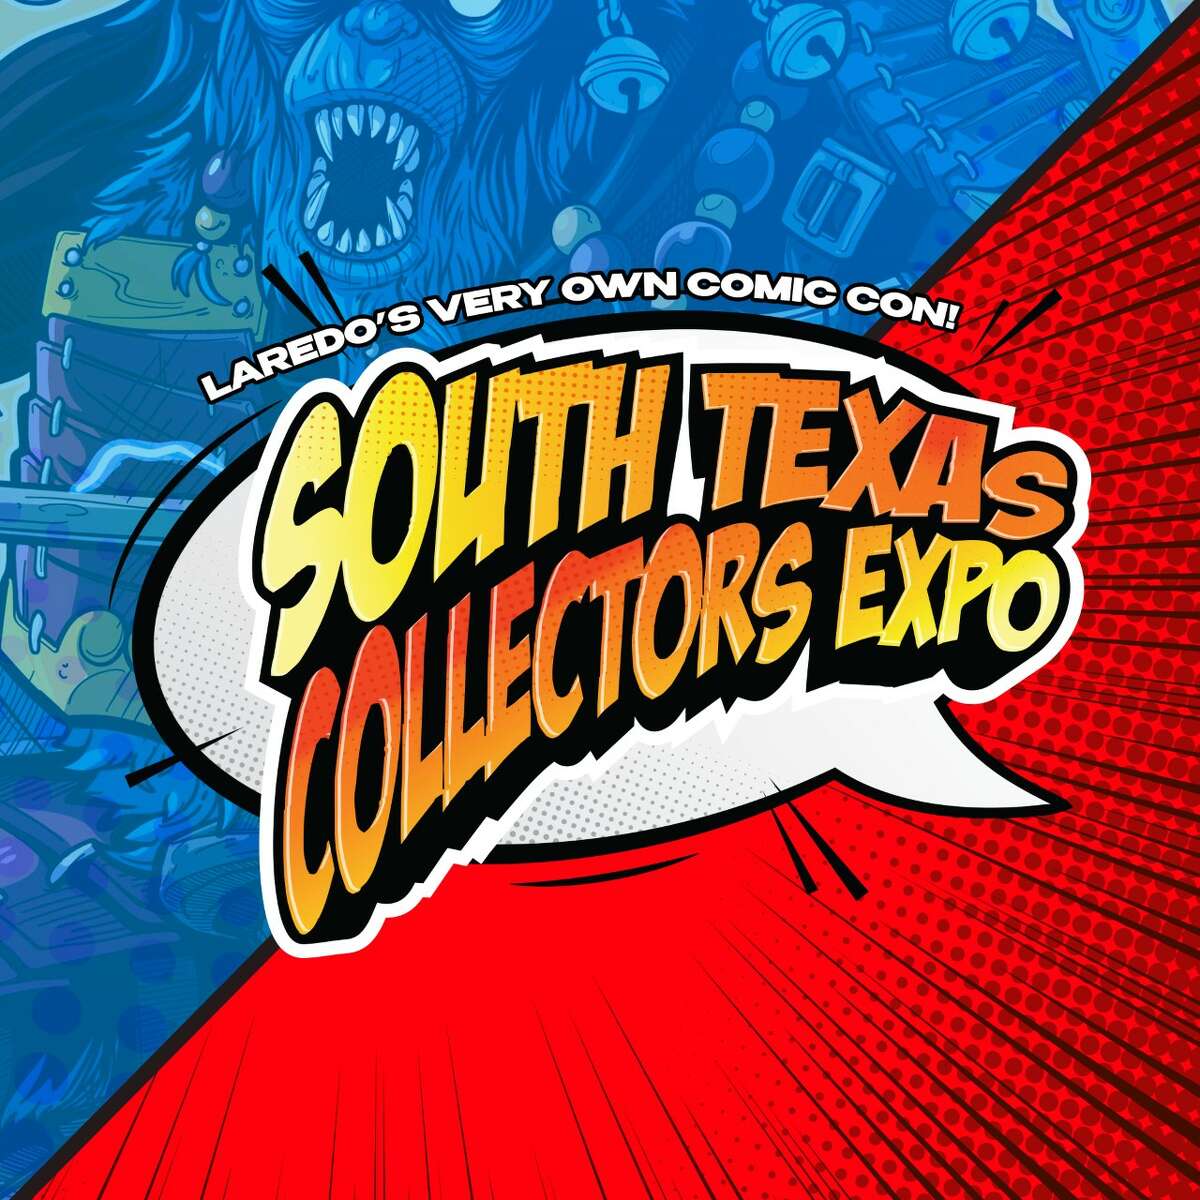 The South Texas Collectors Expo is returning to Laredo as it will be held at TAMIU from Nov. 11-13.